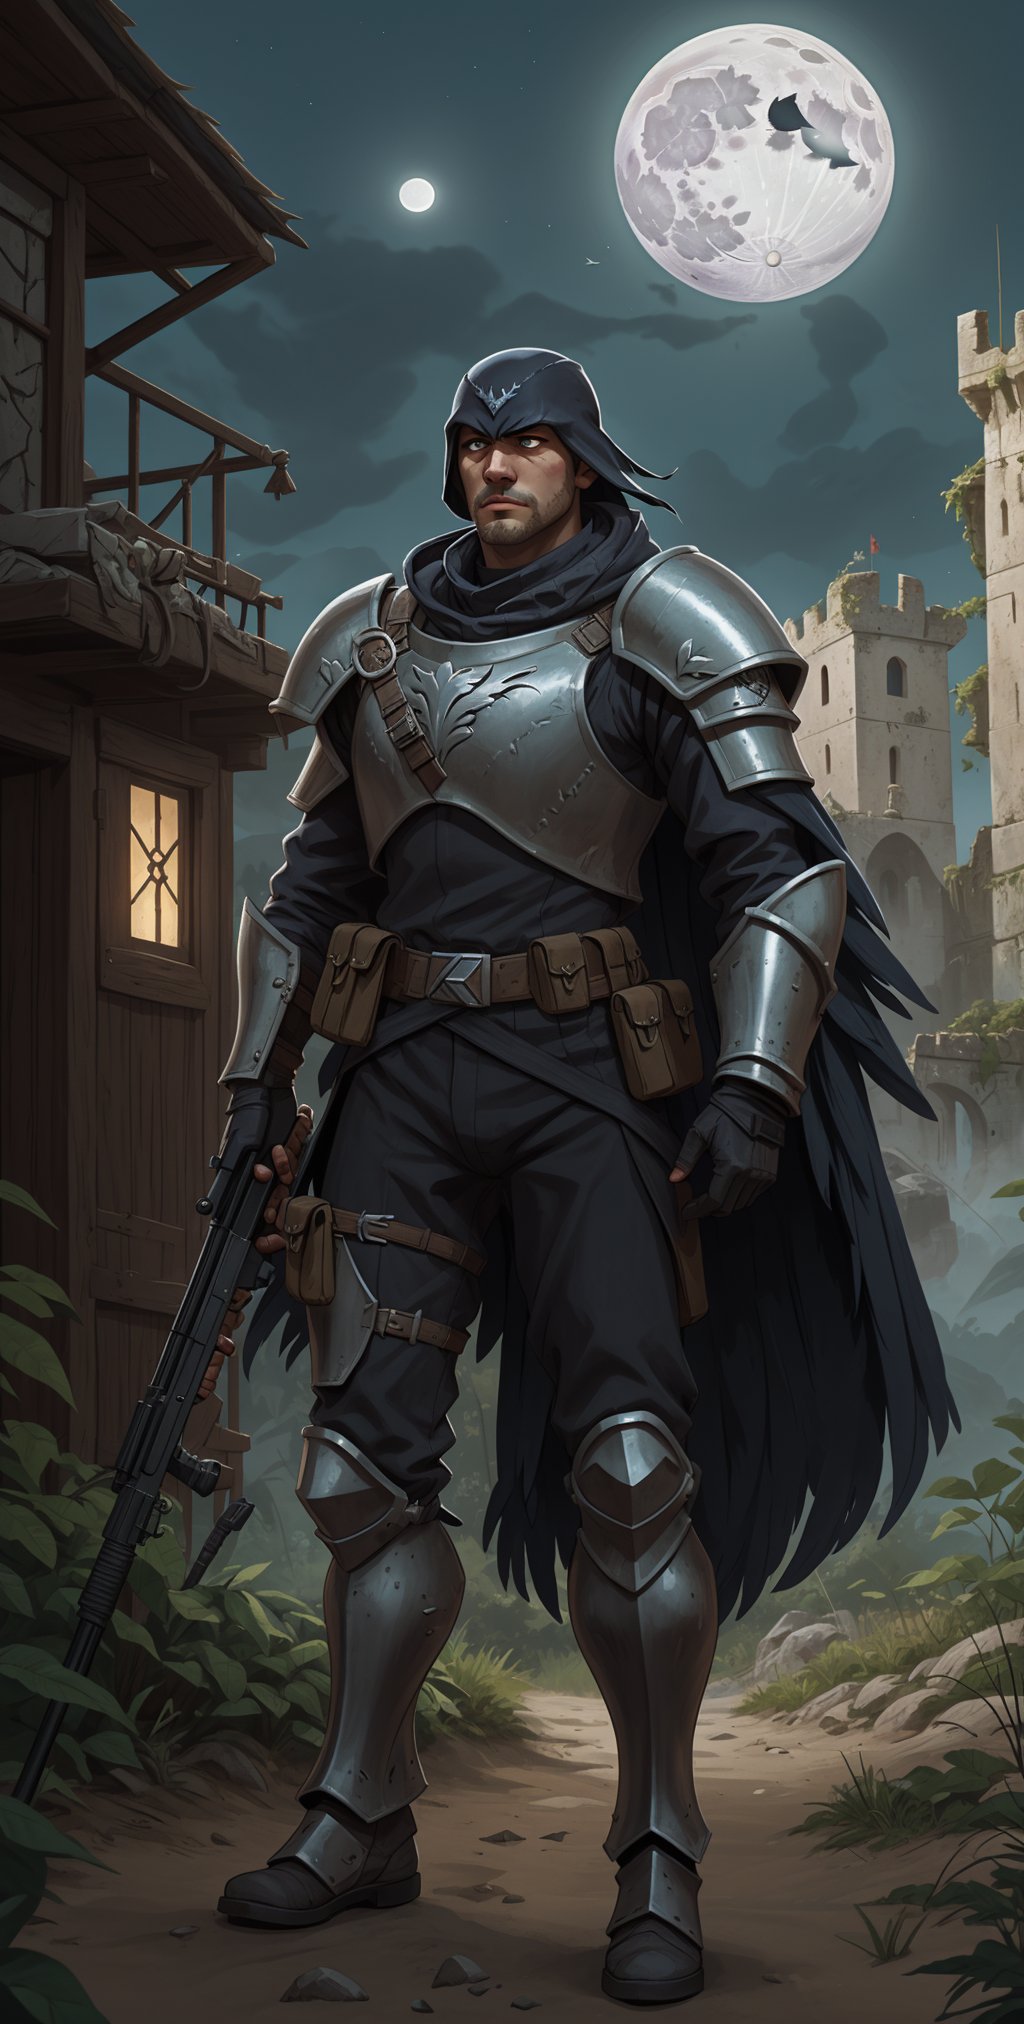 raven guard, elite imperial enforcer sniping in the jungle, holding rifle, wearing detailed (full armor:1.2), corvus helm, scifi scene, ruined castle in far distance, moonlight,  , 